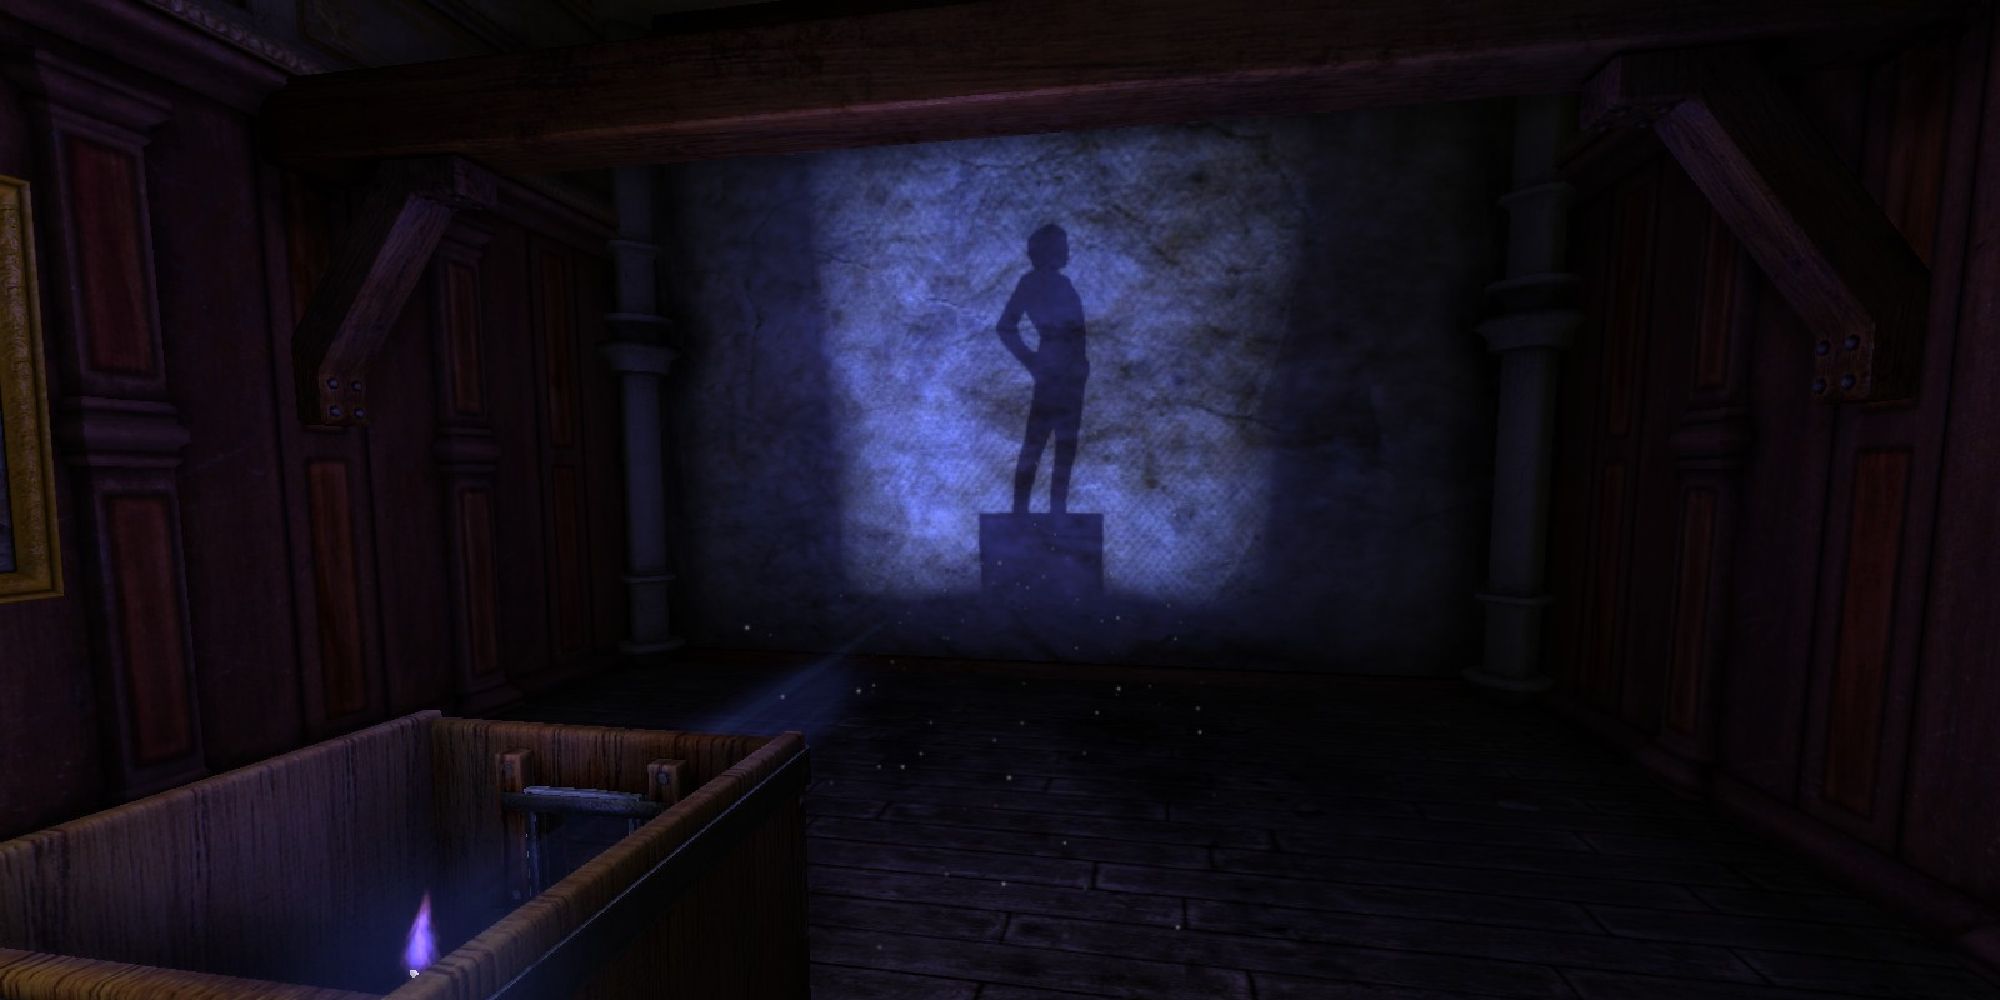 A dark room showing the outline of a statue on the far wall, cast in a blue light.